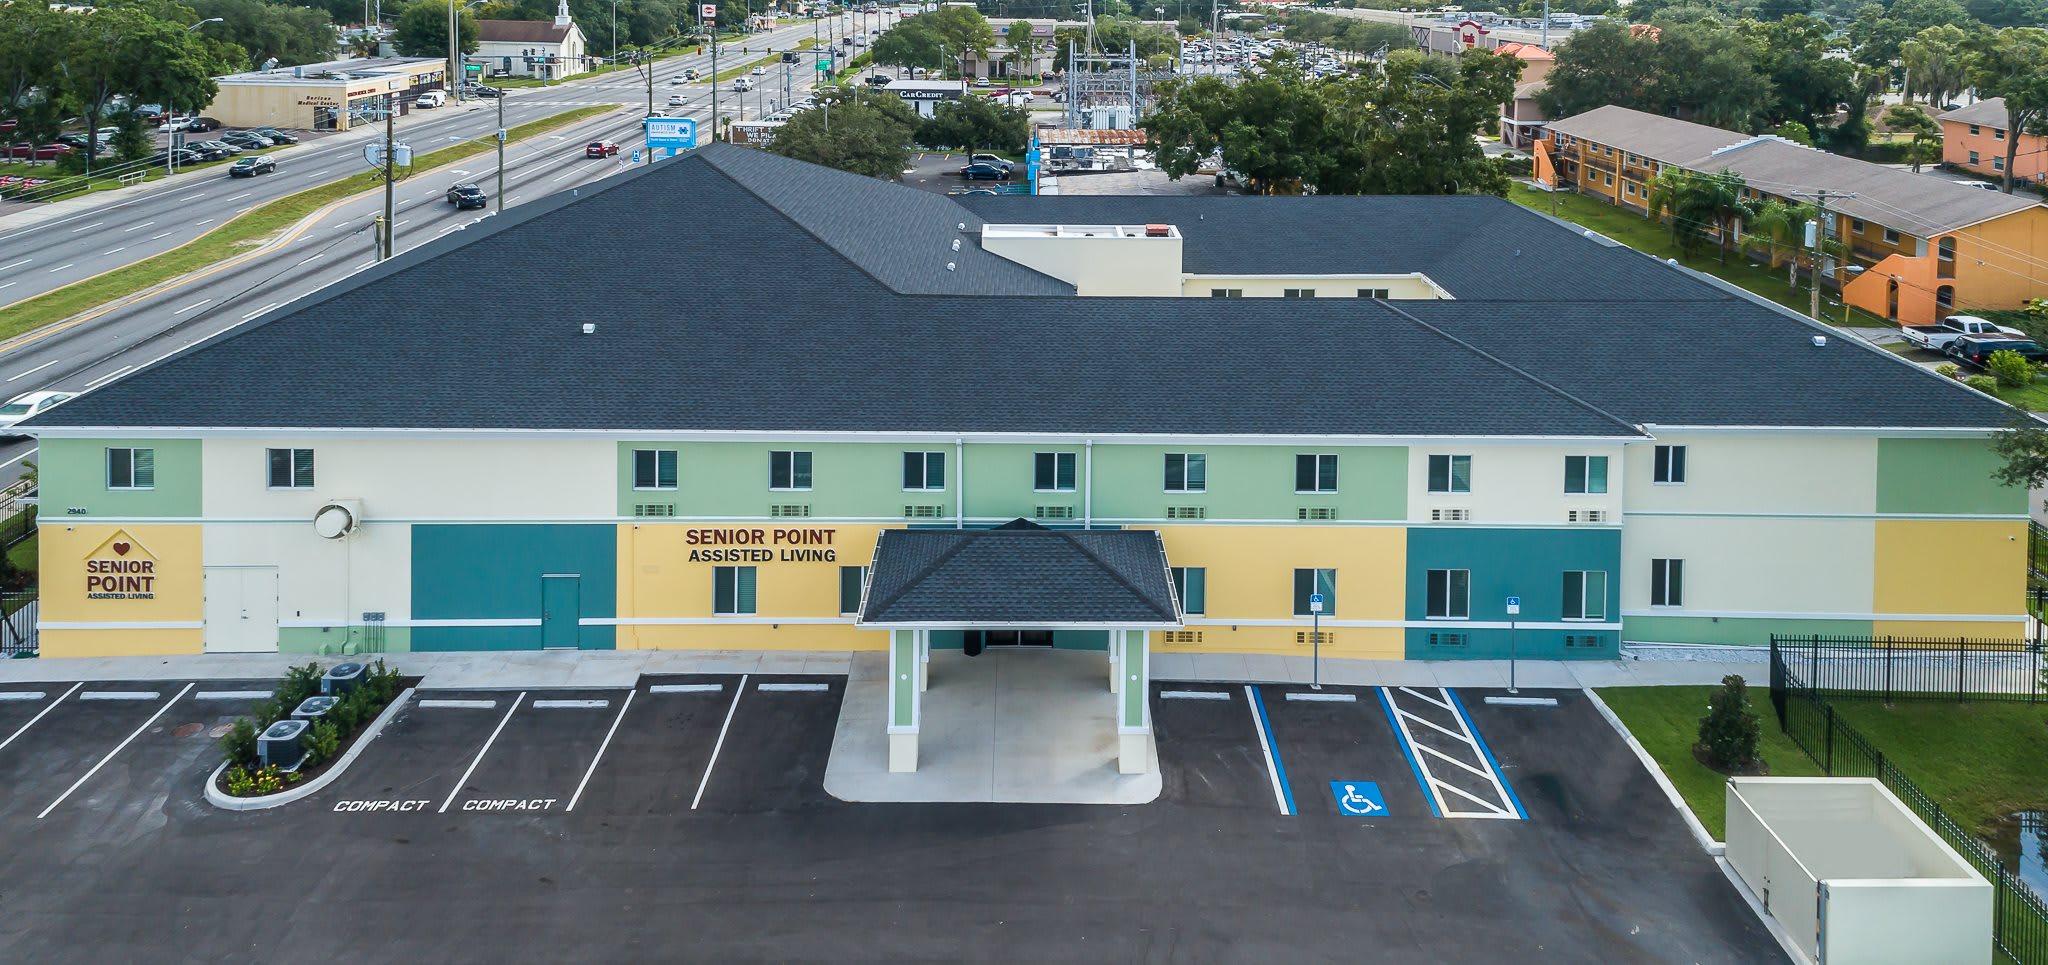 Senior Point Assisted Living Facility